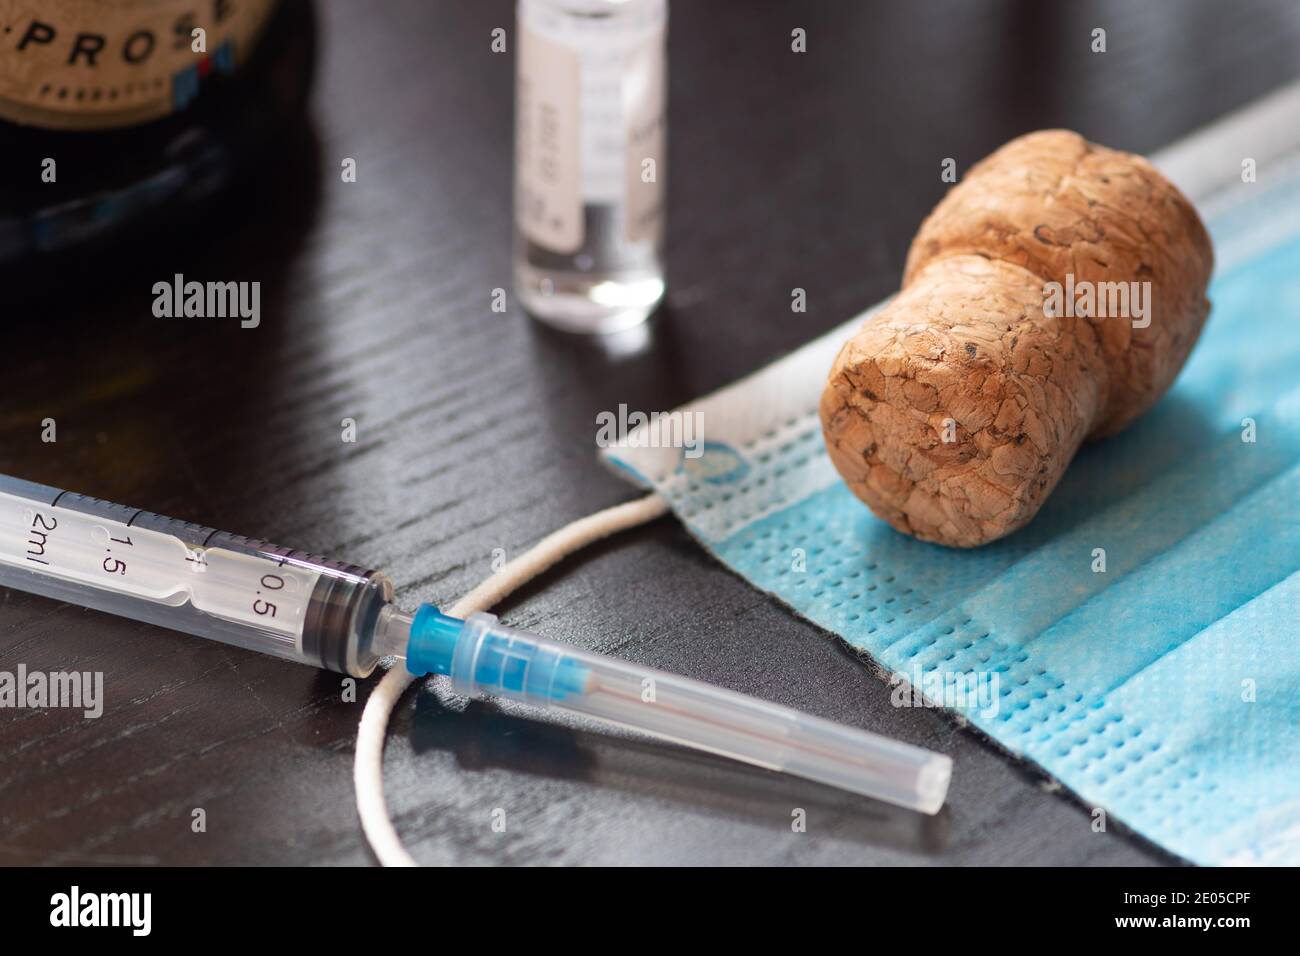 Syringe, vial, surgical face mask, bottle and cork. New year concept during Covid19 or Coronavirus emergency, no party Stock Photo